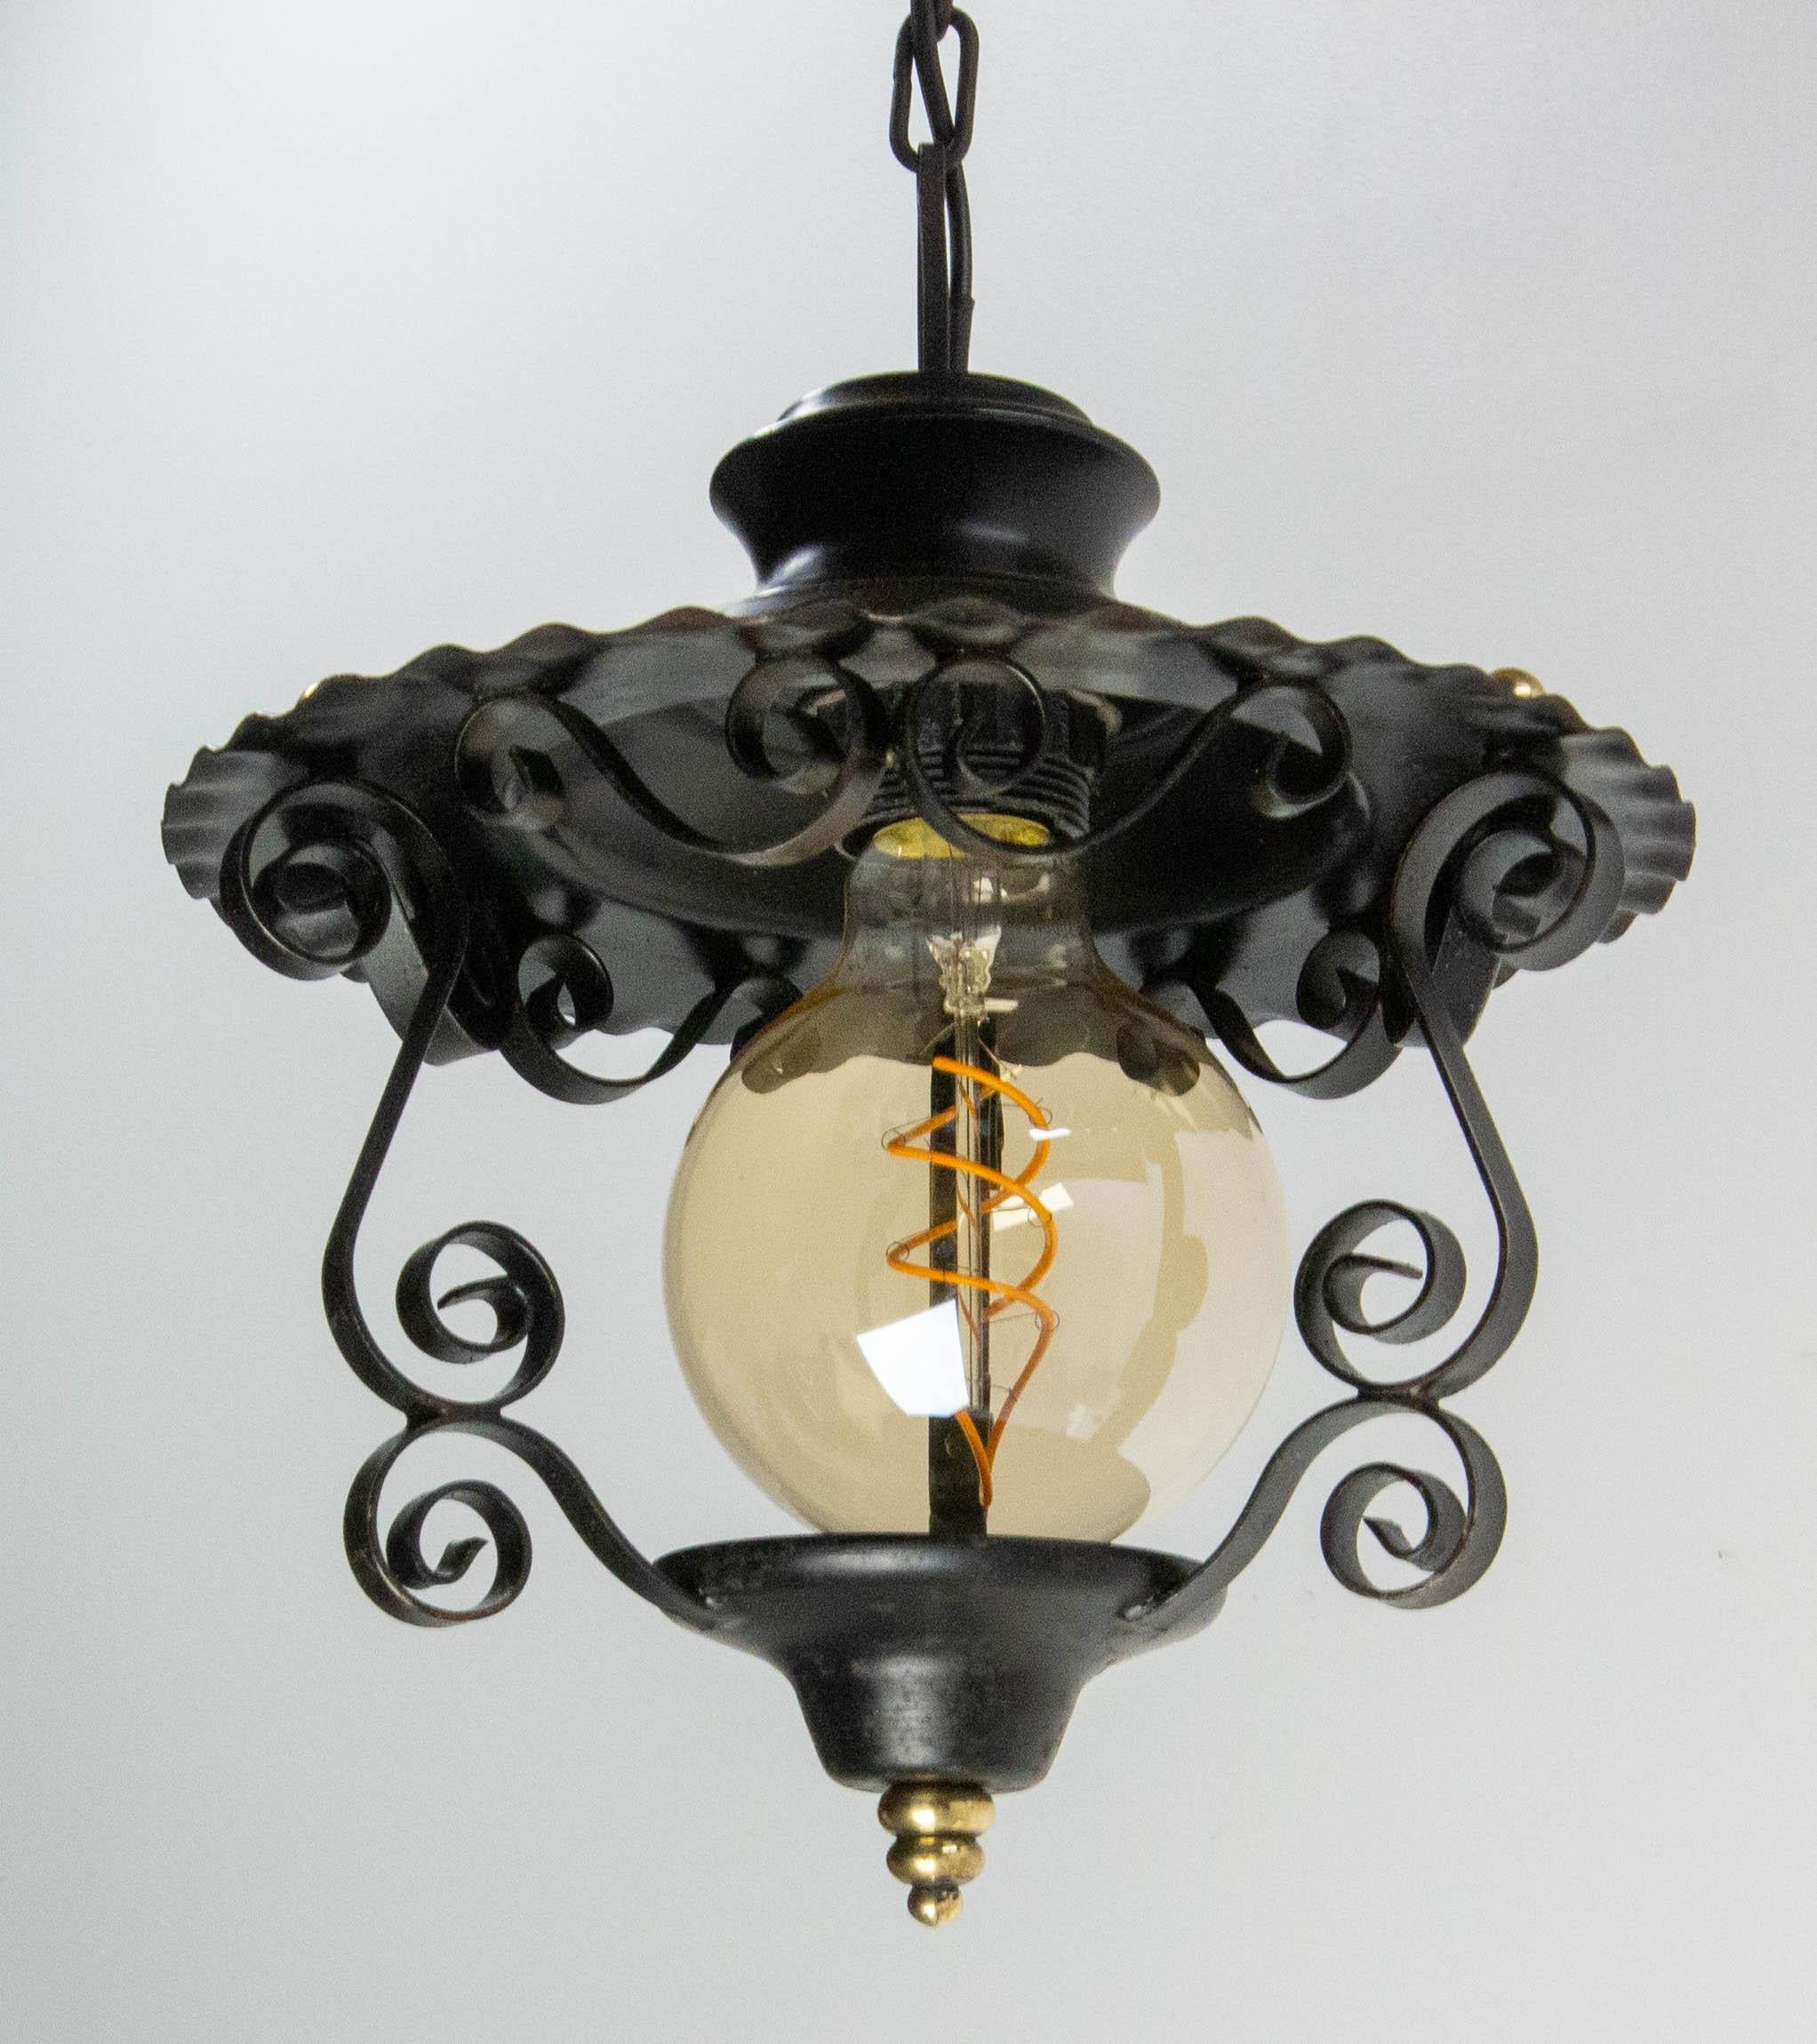 Pendant light chandelier, France, midcentury
Iron and brass. 
This lamp from the 60s has been brought up to date with a recently created bulb.
This can be rewired to USA, UK and European standards.
Good condition.

Shipping
D 19 H 19 0.7